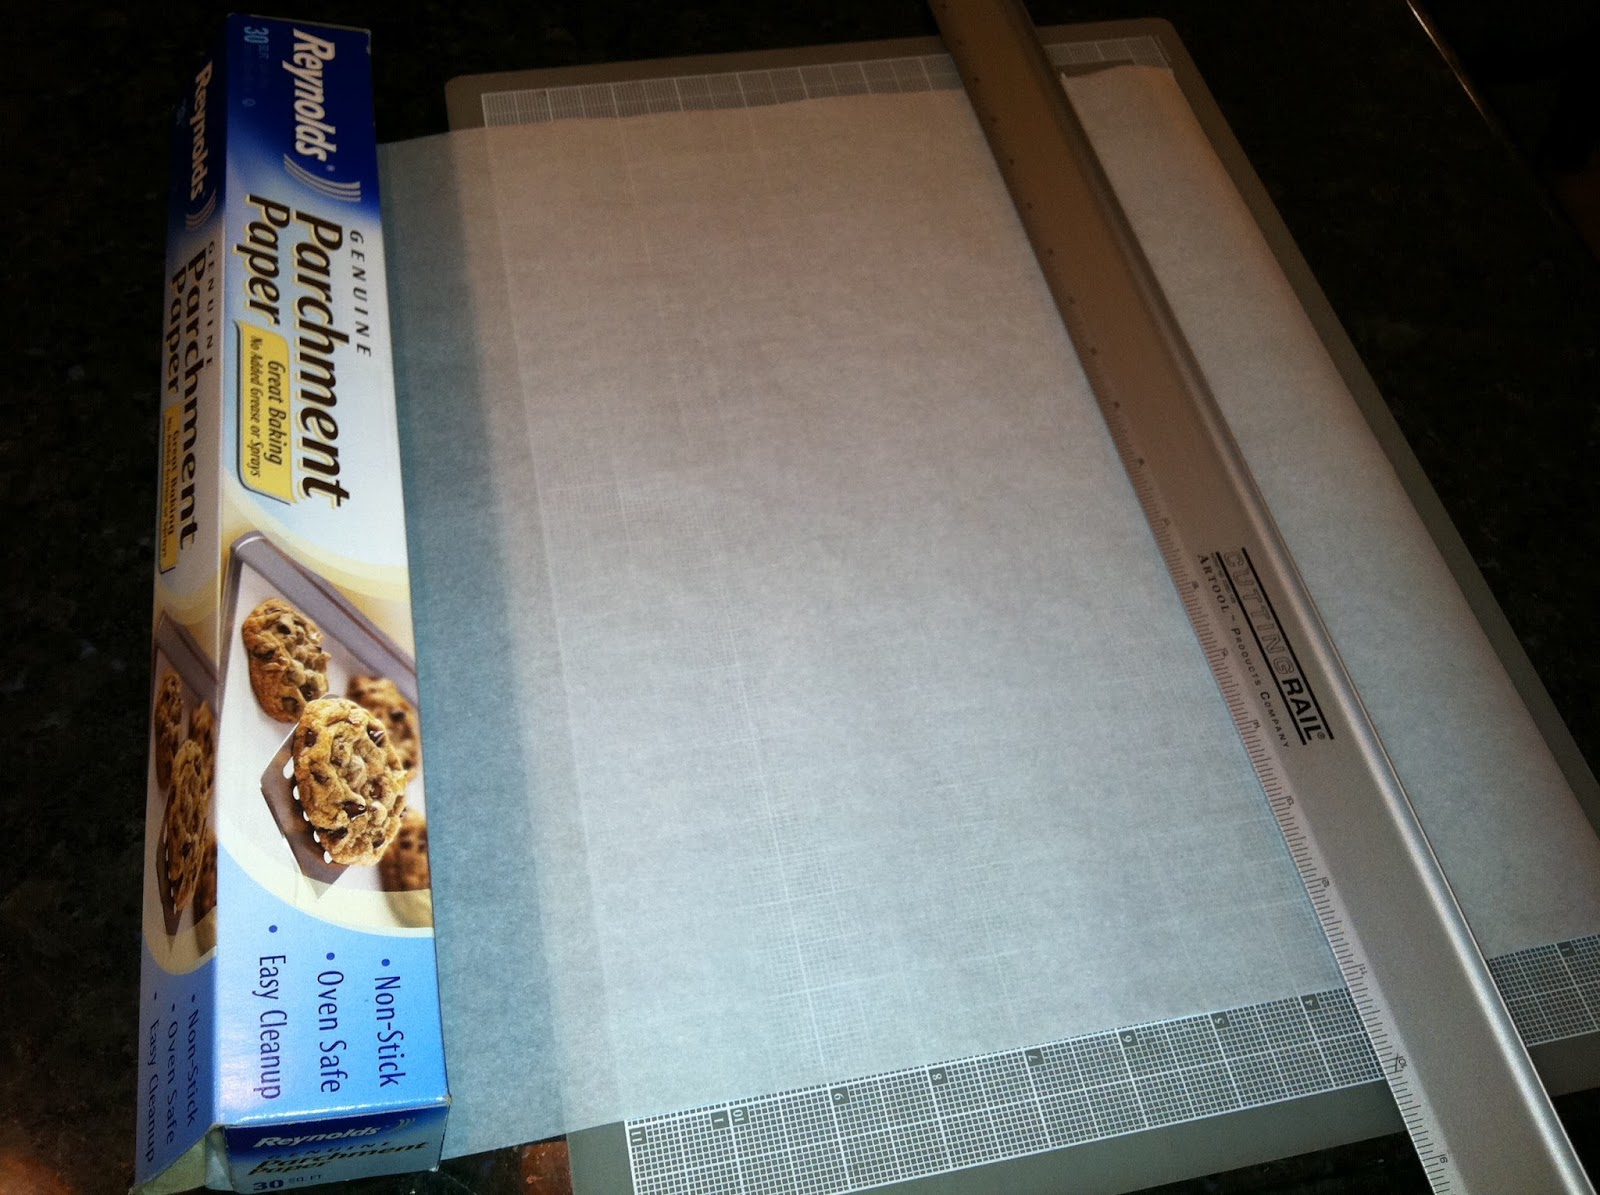 The Iced Queen: Cutting Parchment Paper Squares